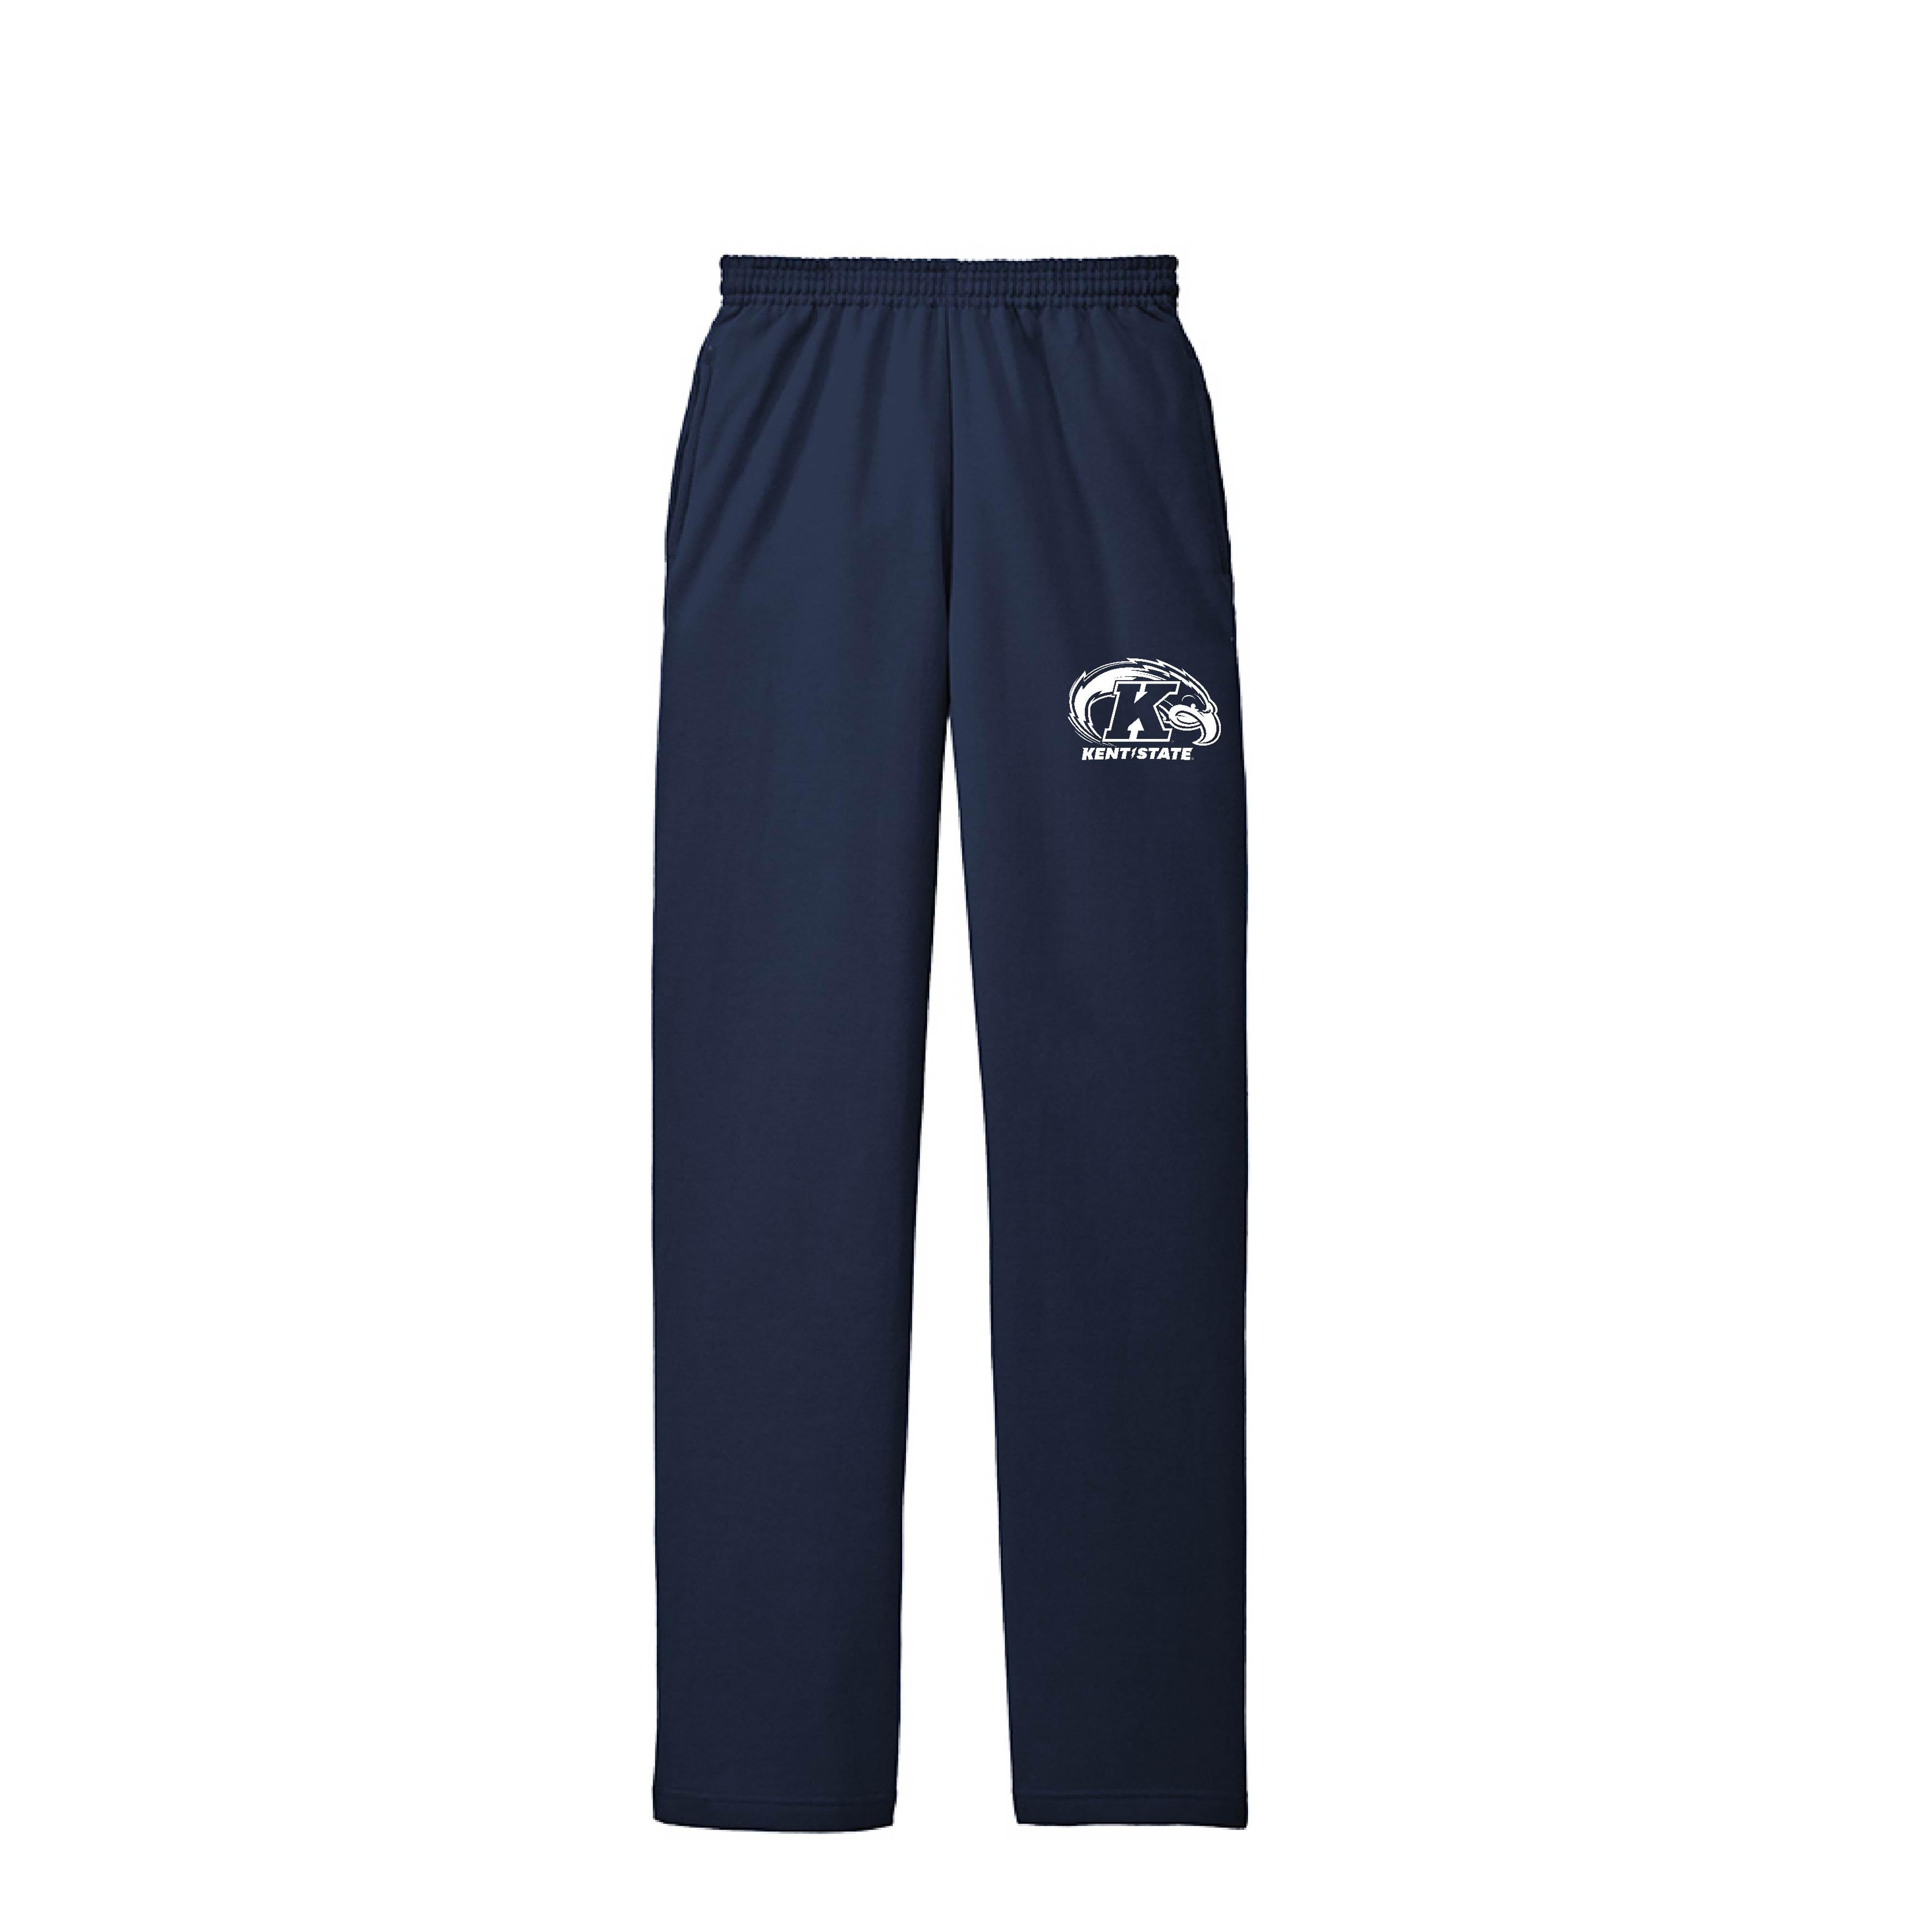 Kent State Navy Golden Flashes Navy Pants